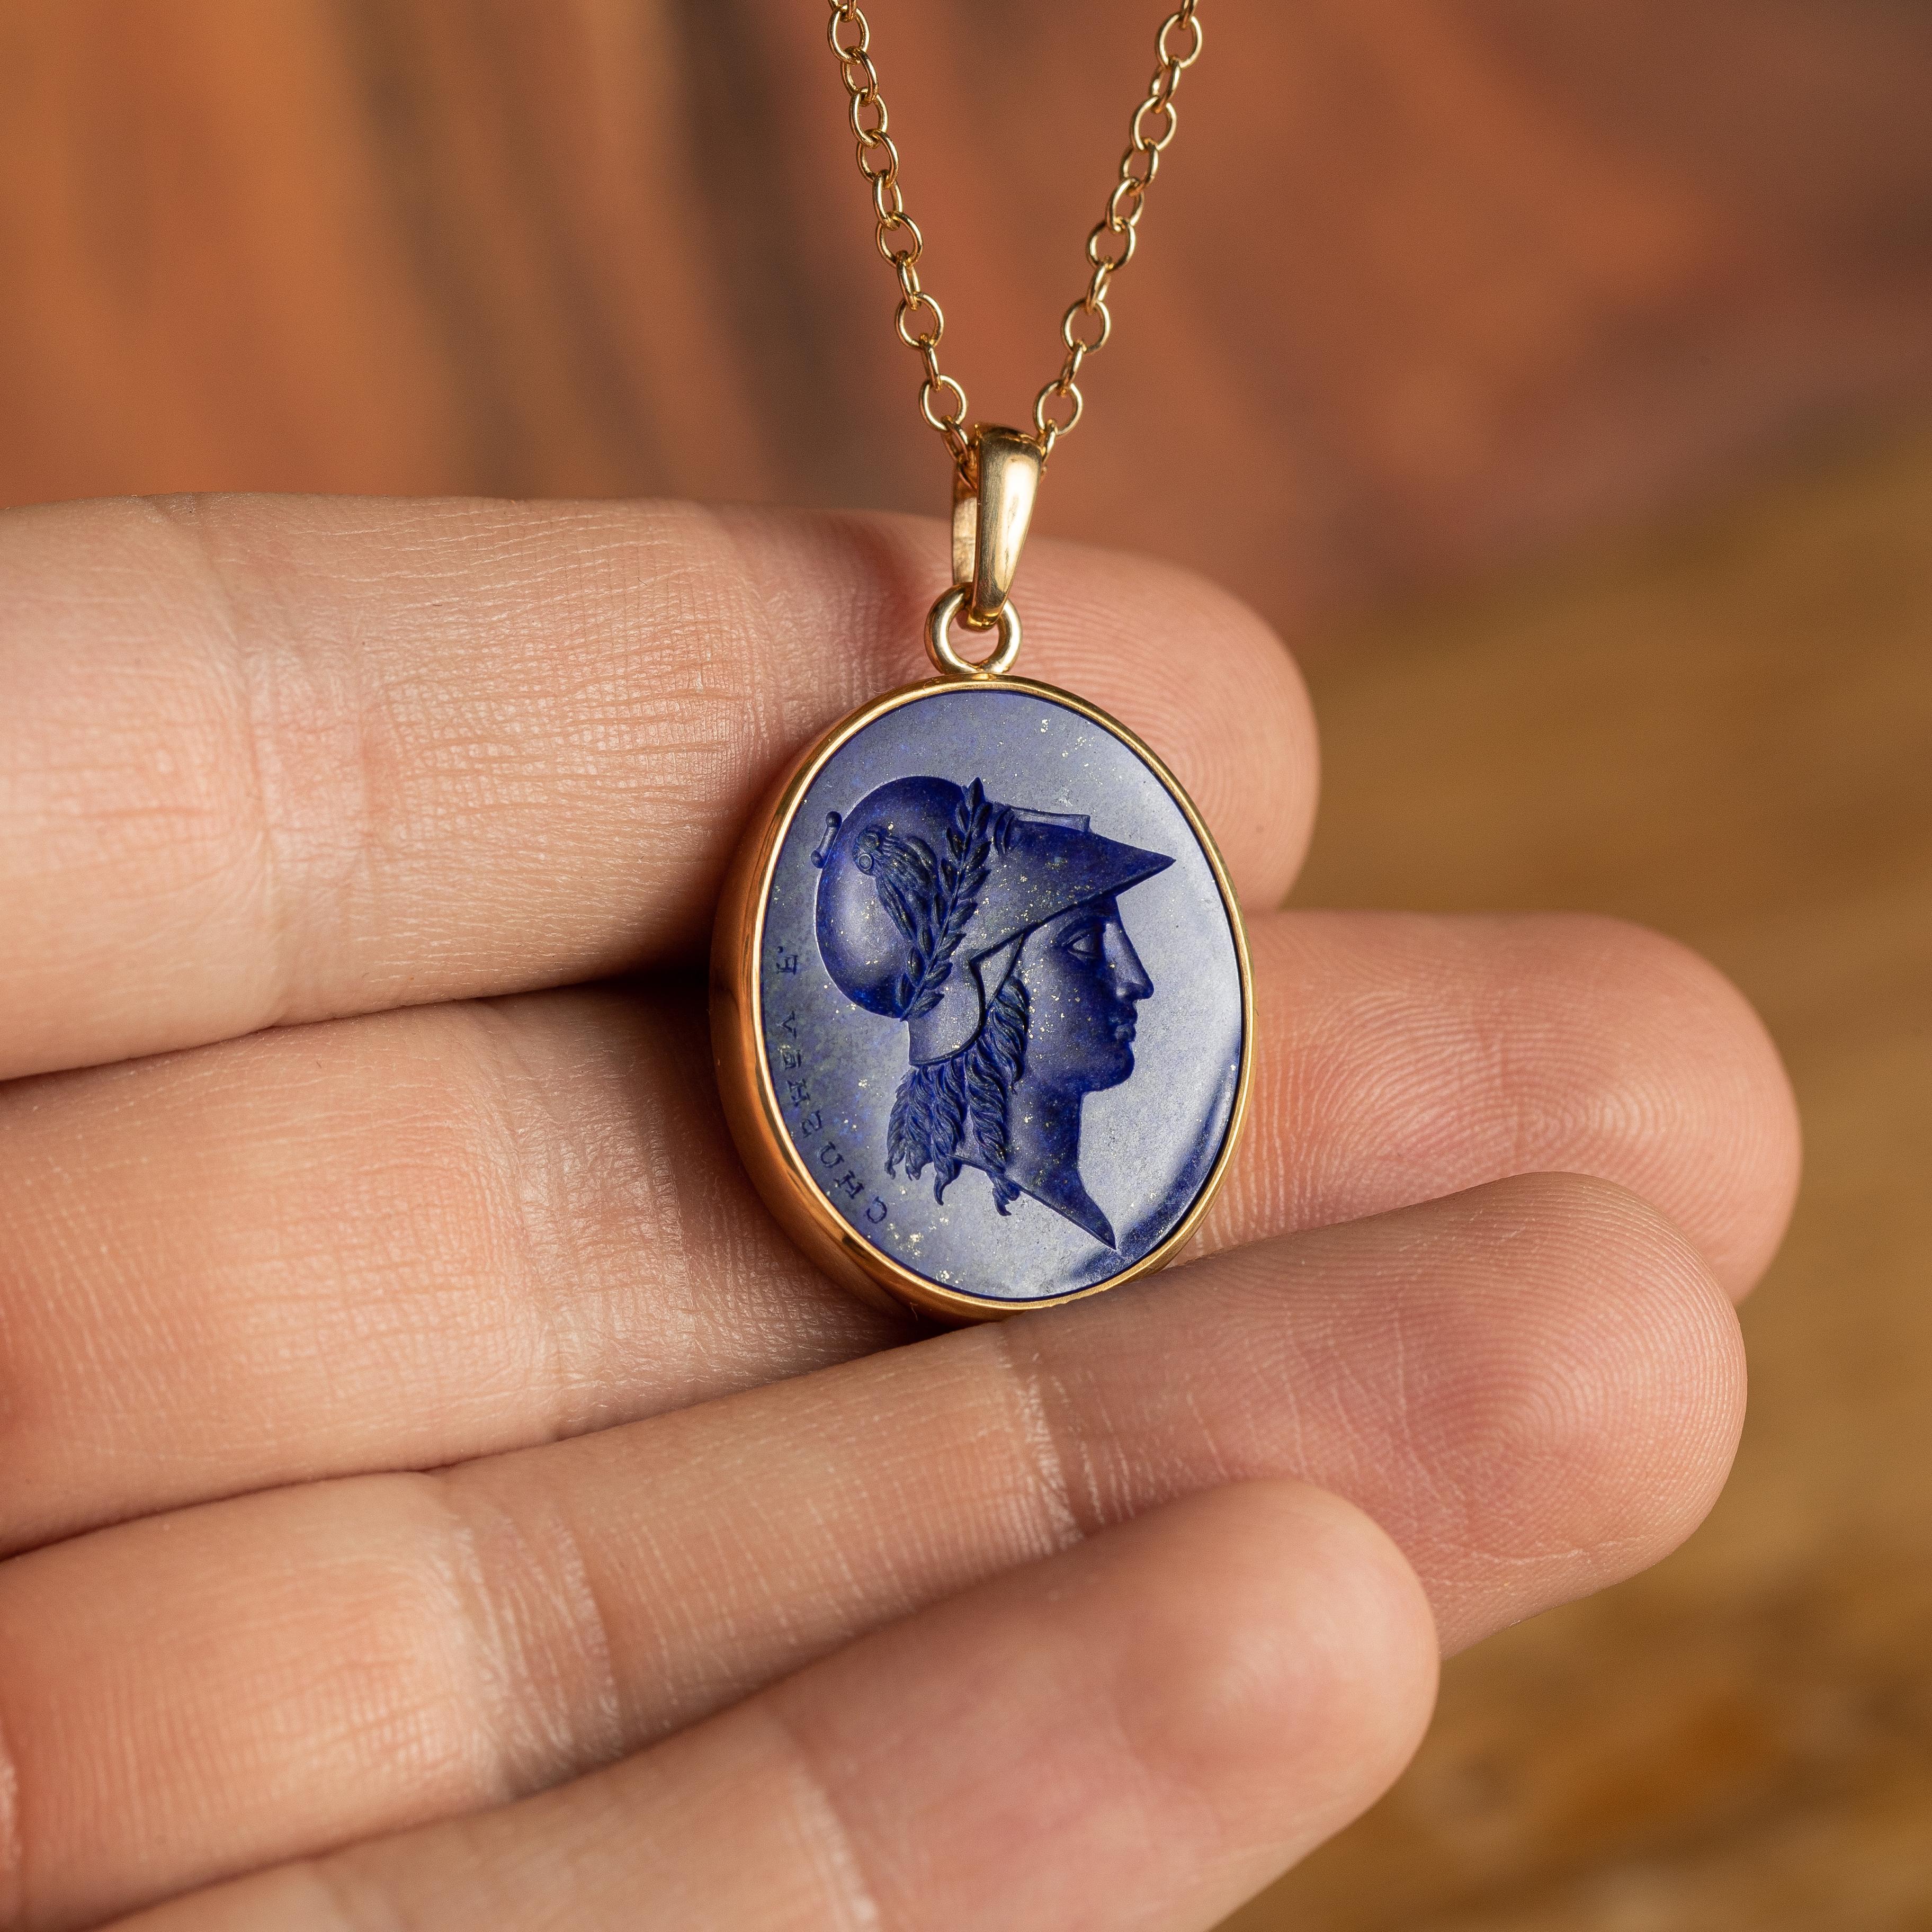 This exquisite intaglio is masterfully engraved onto lapis lazuli and features a depiction of Athena. The stone is set in a 18K karat gold pendant. 

Lapis lazuli is one of the most sought after stones for engraving due to its rich color, unique